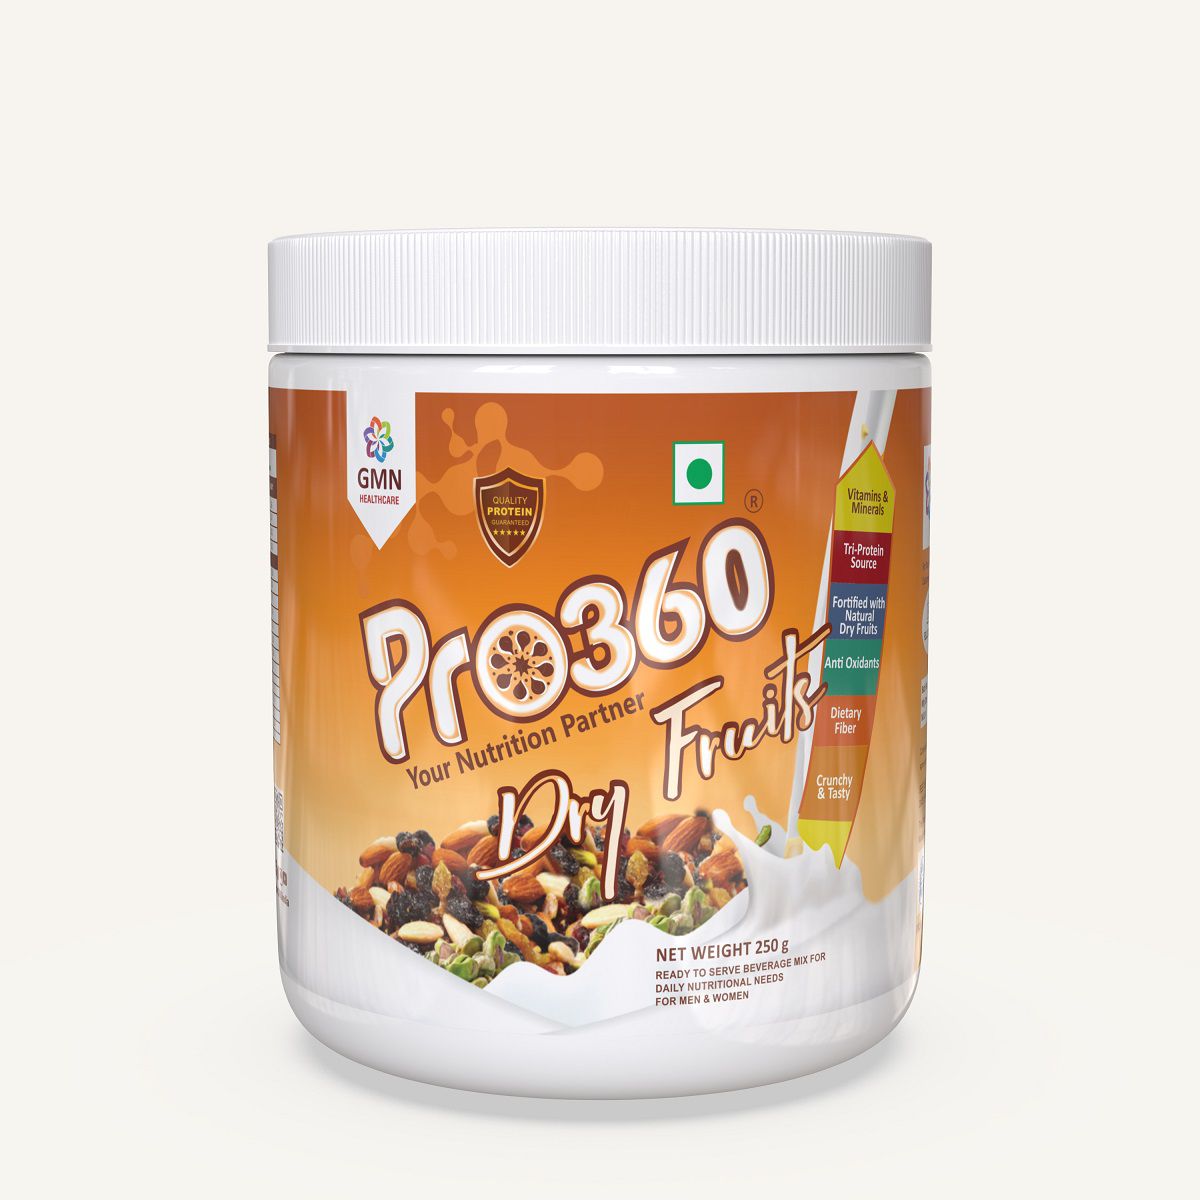 PRO360 Dry Fruits Natural Supplement Health Drink Powder 250 gm